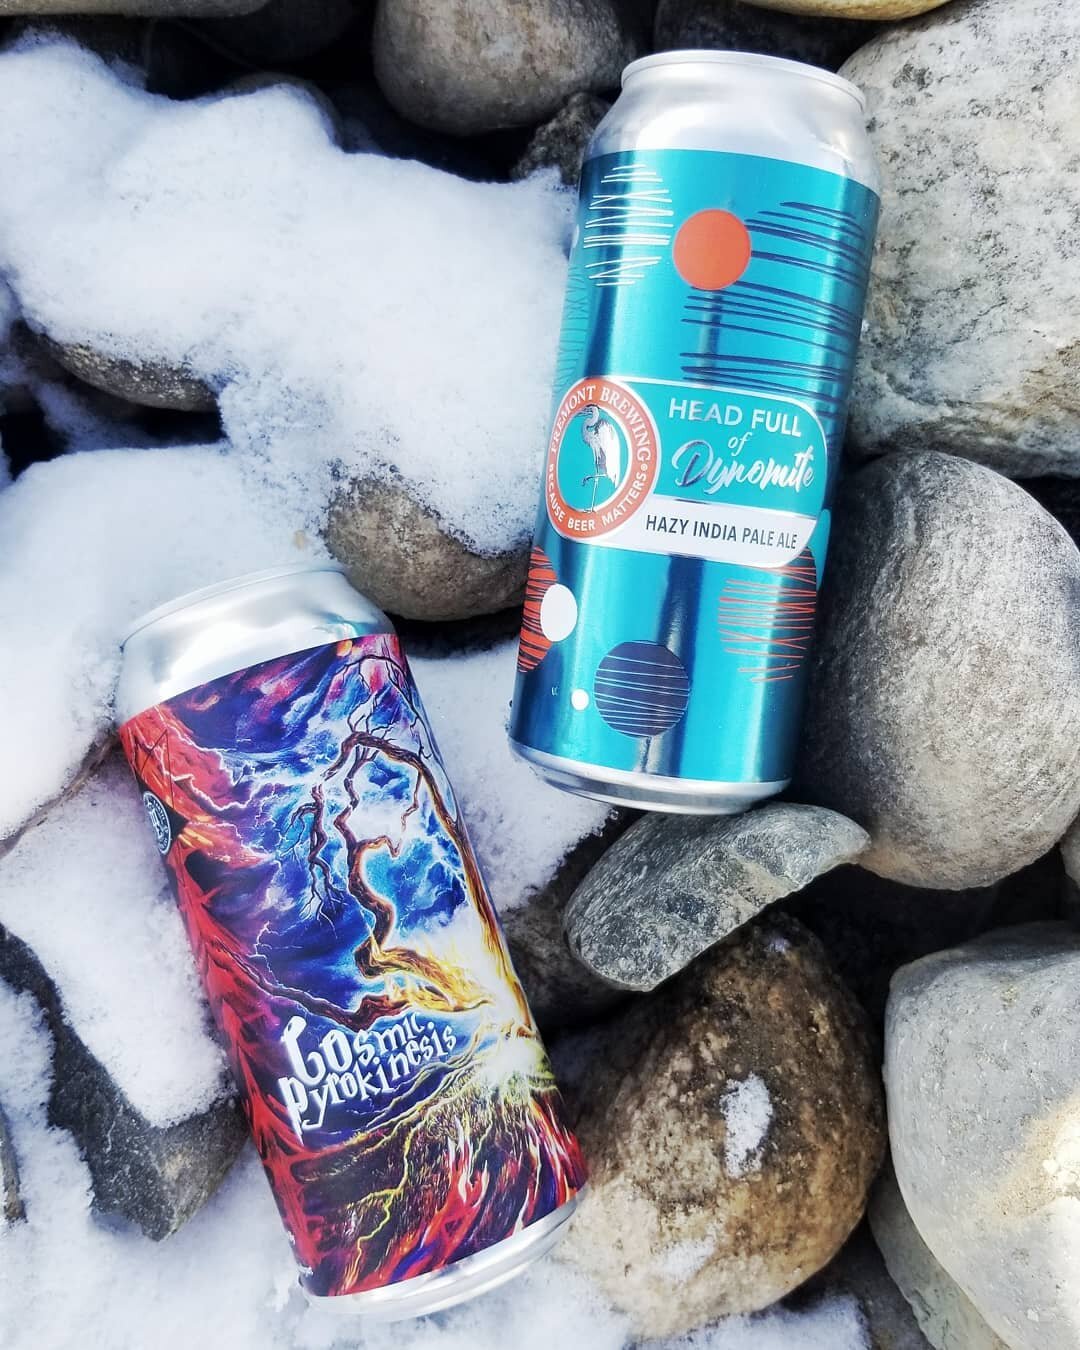 This Just In! Two new cans.

HEAD FULL OF DYNOMITE Hazy IPA from @fremontbrewing The newest in their amazing series.

COSMIC PYROKINESIS Hazy IPA from @motherearthbrewco 

#craftbeer #bozeman #hoplounge #hazyipa #neipa